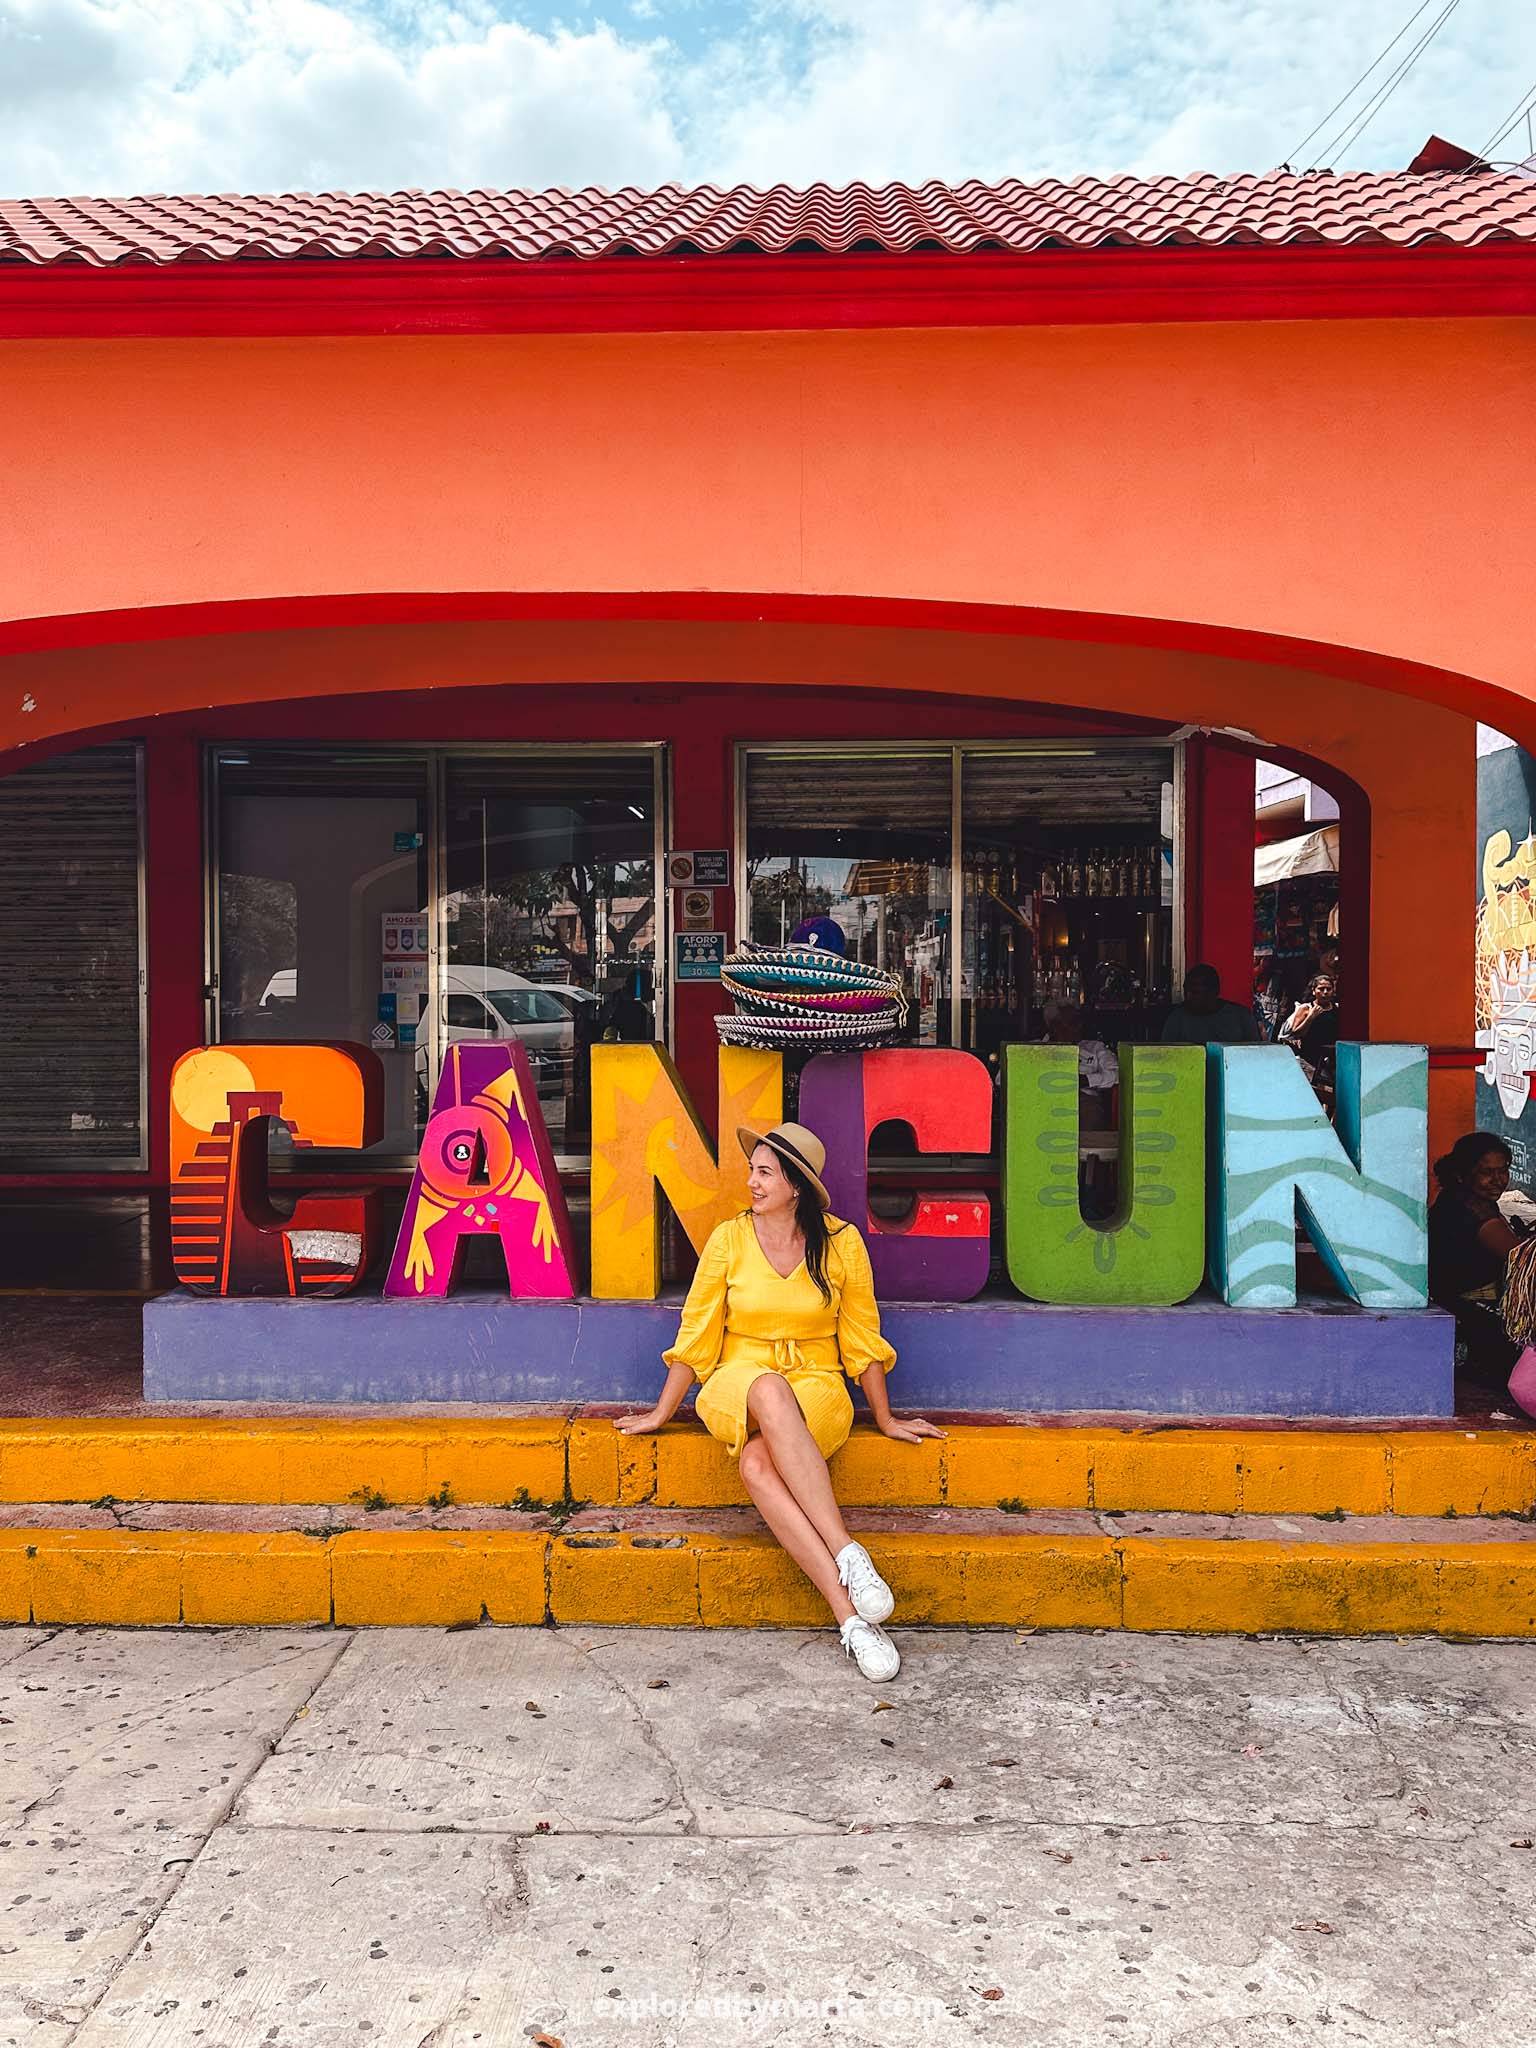 Cancun, Mexico - the colorful Cancun letters at Mercado 28